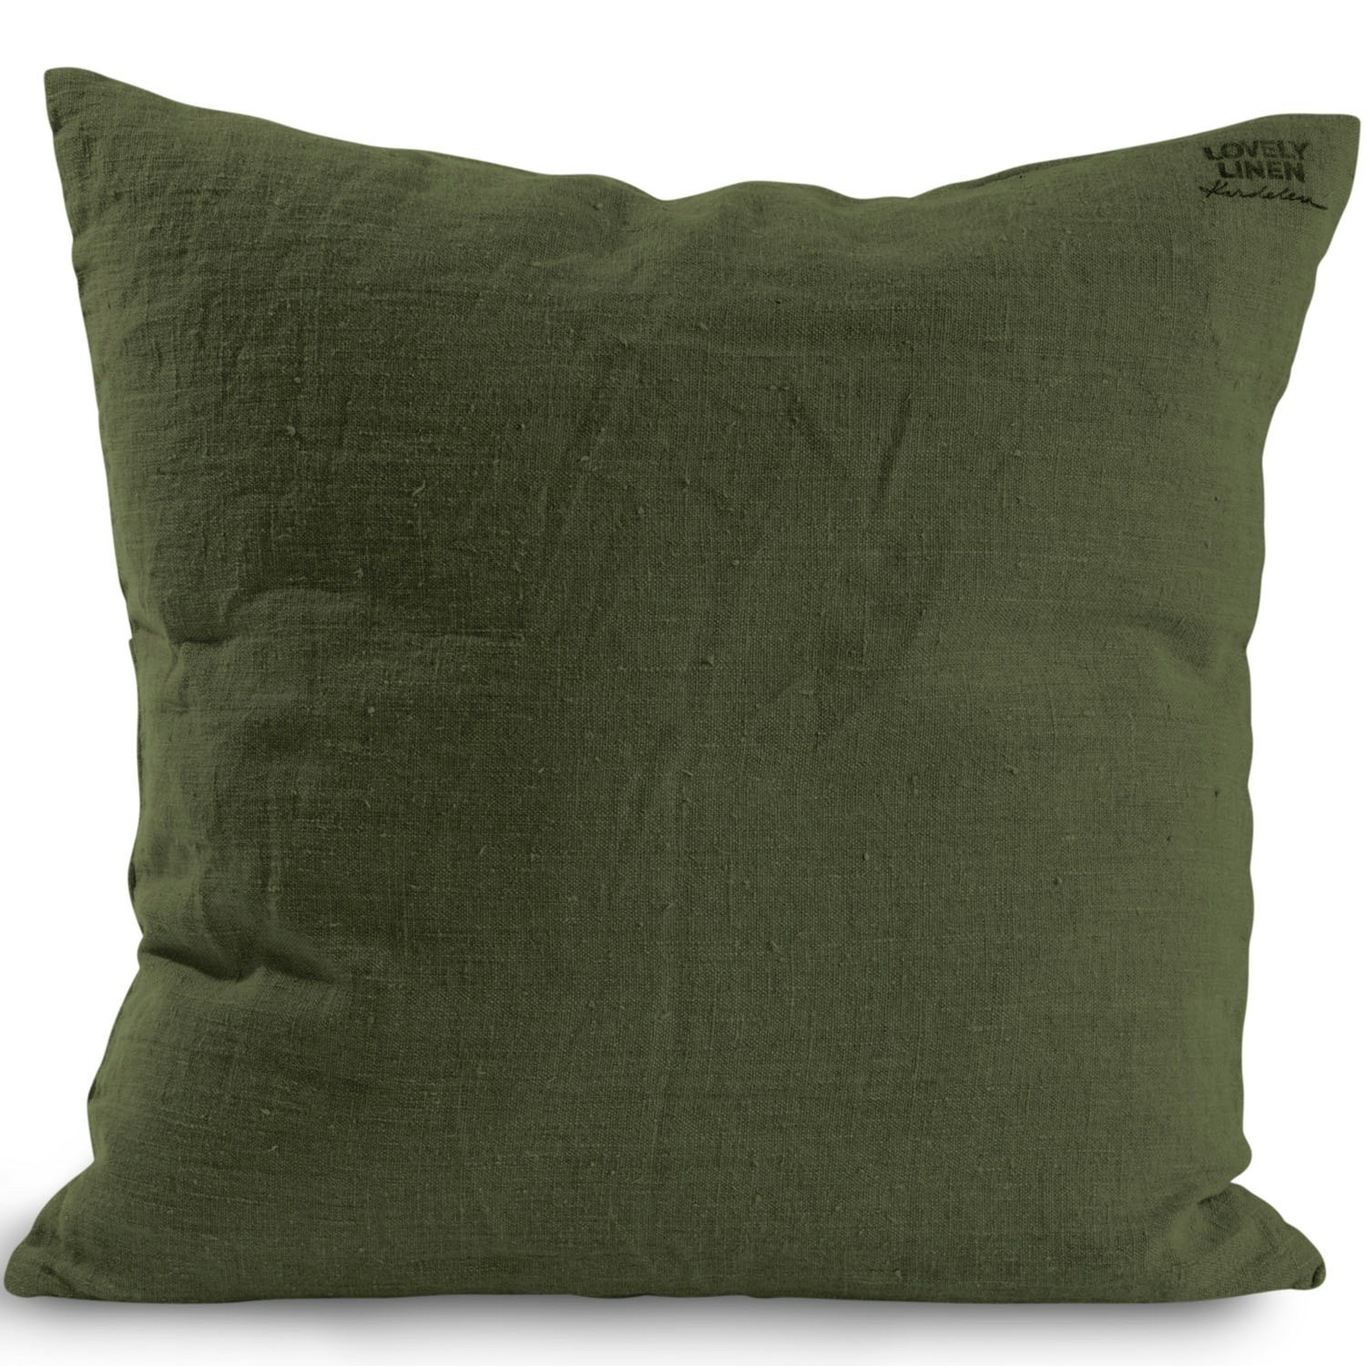 Lovely Kussenhoes 50x50 cm, Jeep Green